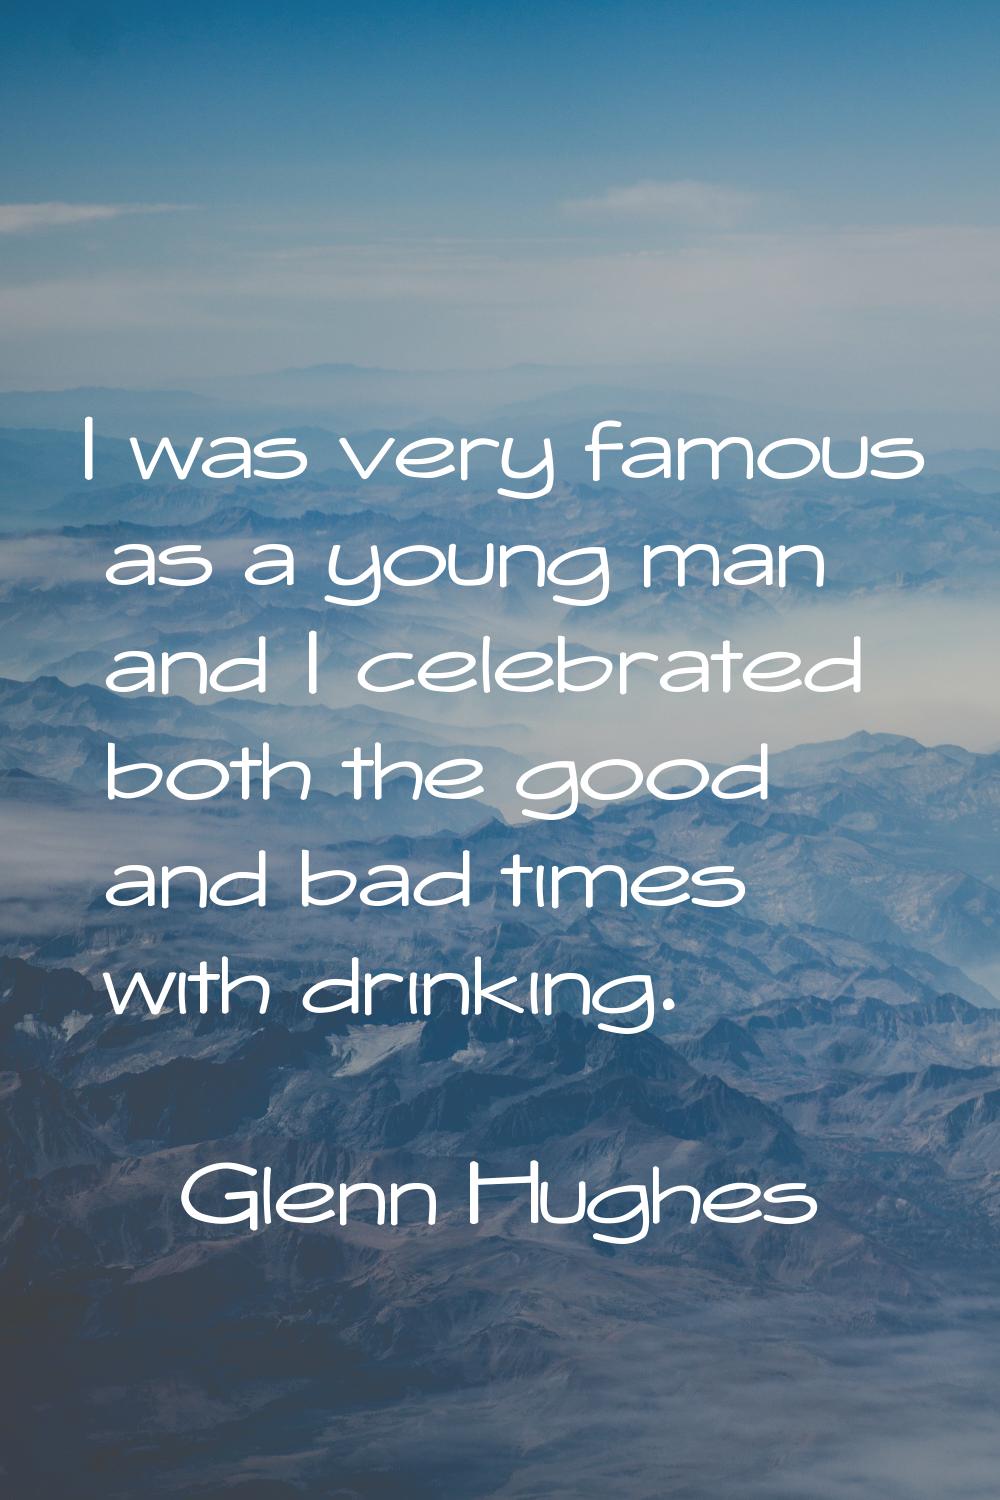 I was very famous as a young man and I celebrated both the good and bad times with drinking.